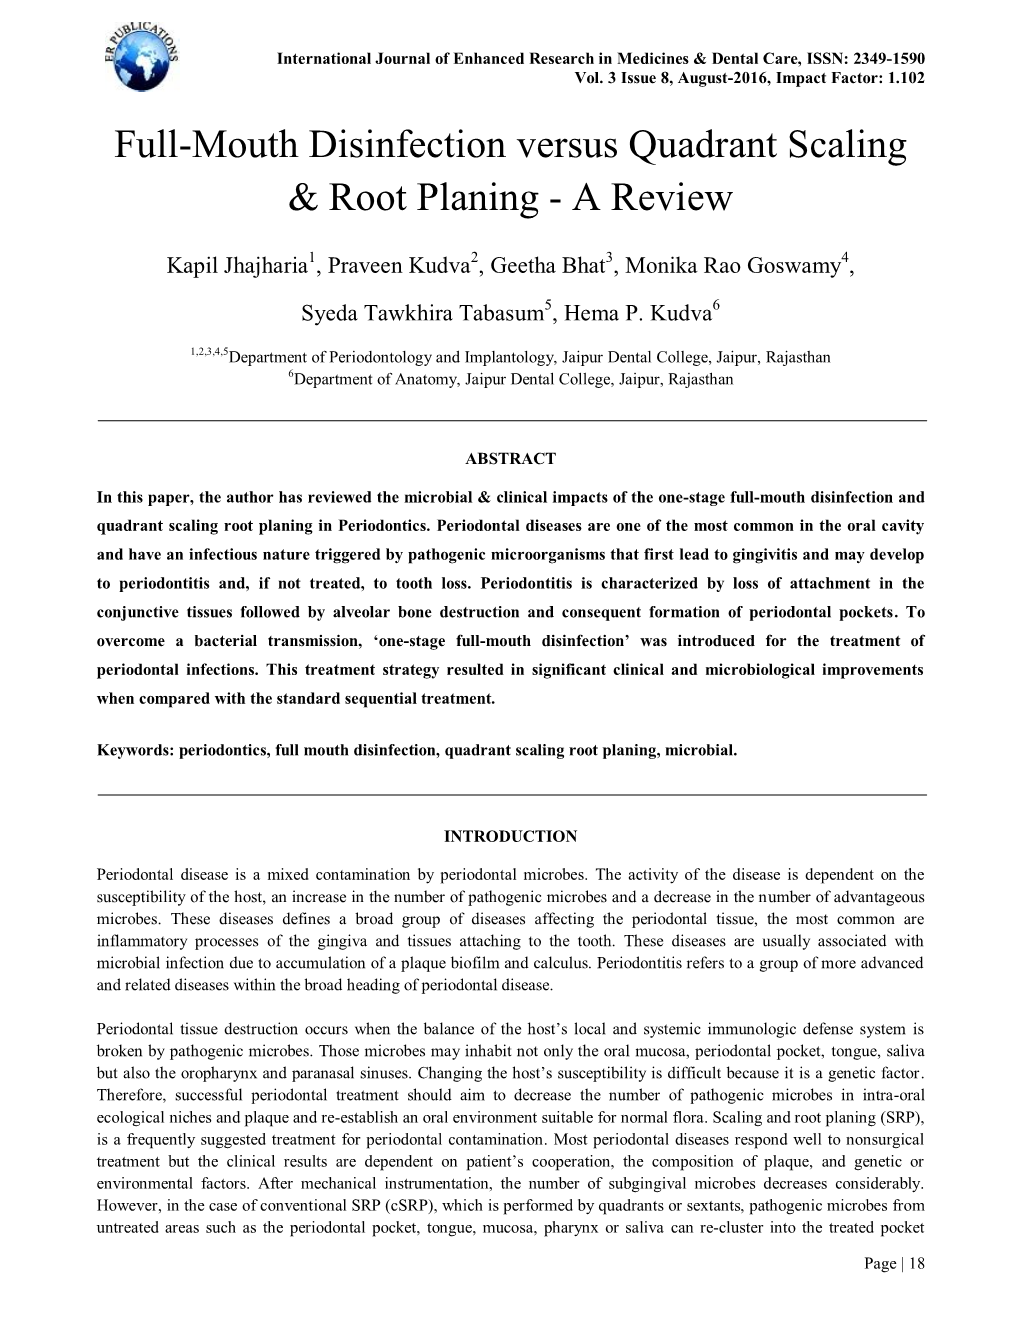 Full-Mouth Disinfection Versus Quadrant Scaling & Root Planing - a Review